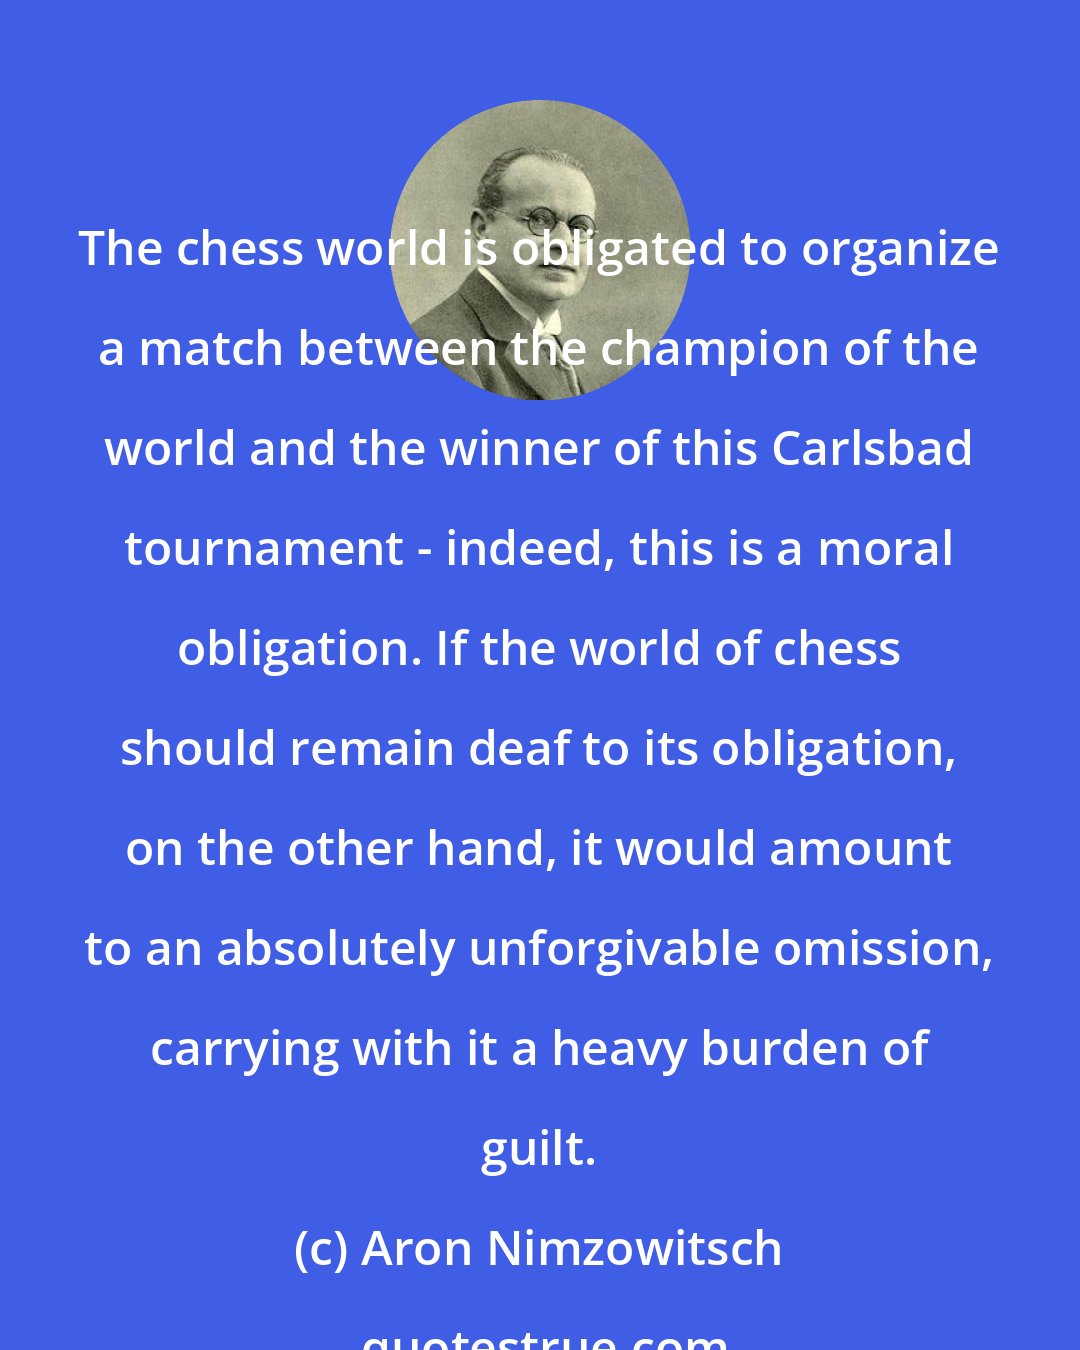 Aron Nimzowitsch: The chess world is obligated to organize a match between the champion of the world and the winner of this Carlsbad tournament - indeed, this is a moral obligation. If the world of chess should remain deaf to its obligation, on the other hand, it would amount to an absolutely unforgivable omission, carrying with it a heavy burden of guilt.